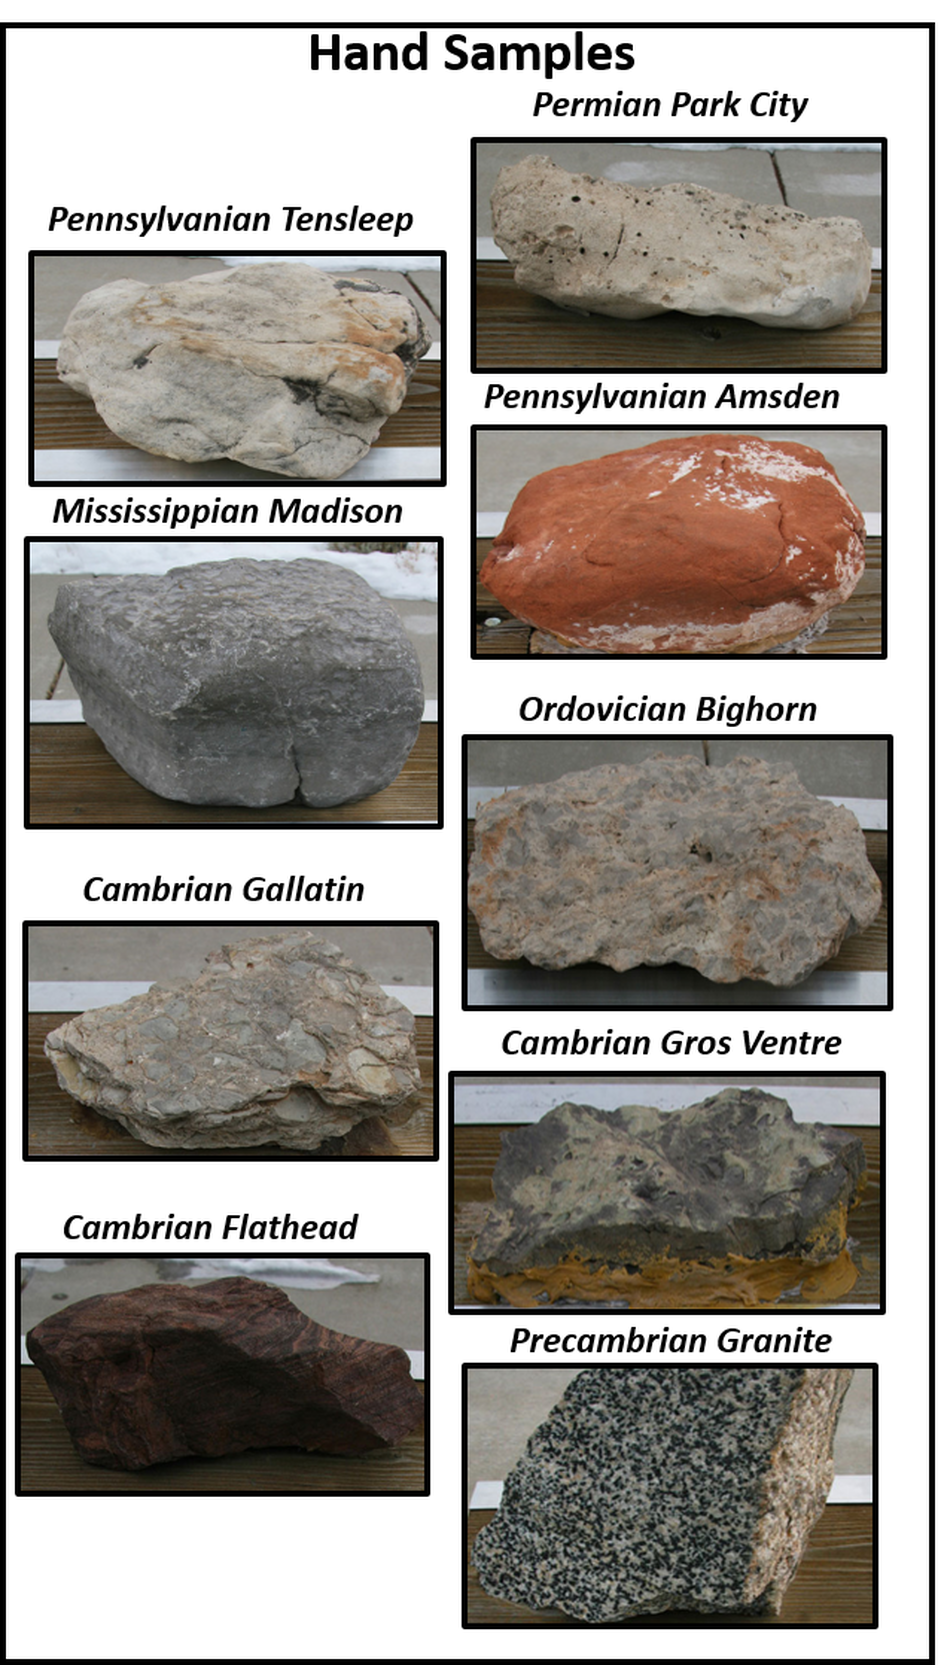 Pictures of Paleozoic rocks  from Sinks Canyon, Fremont County, Wyoming